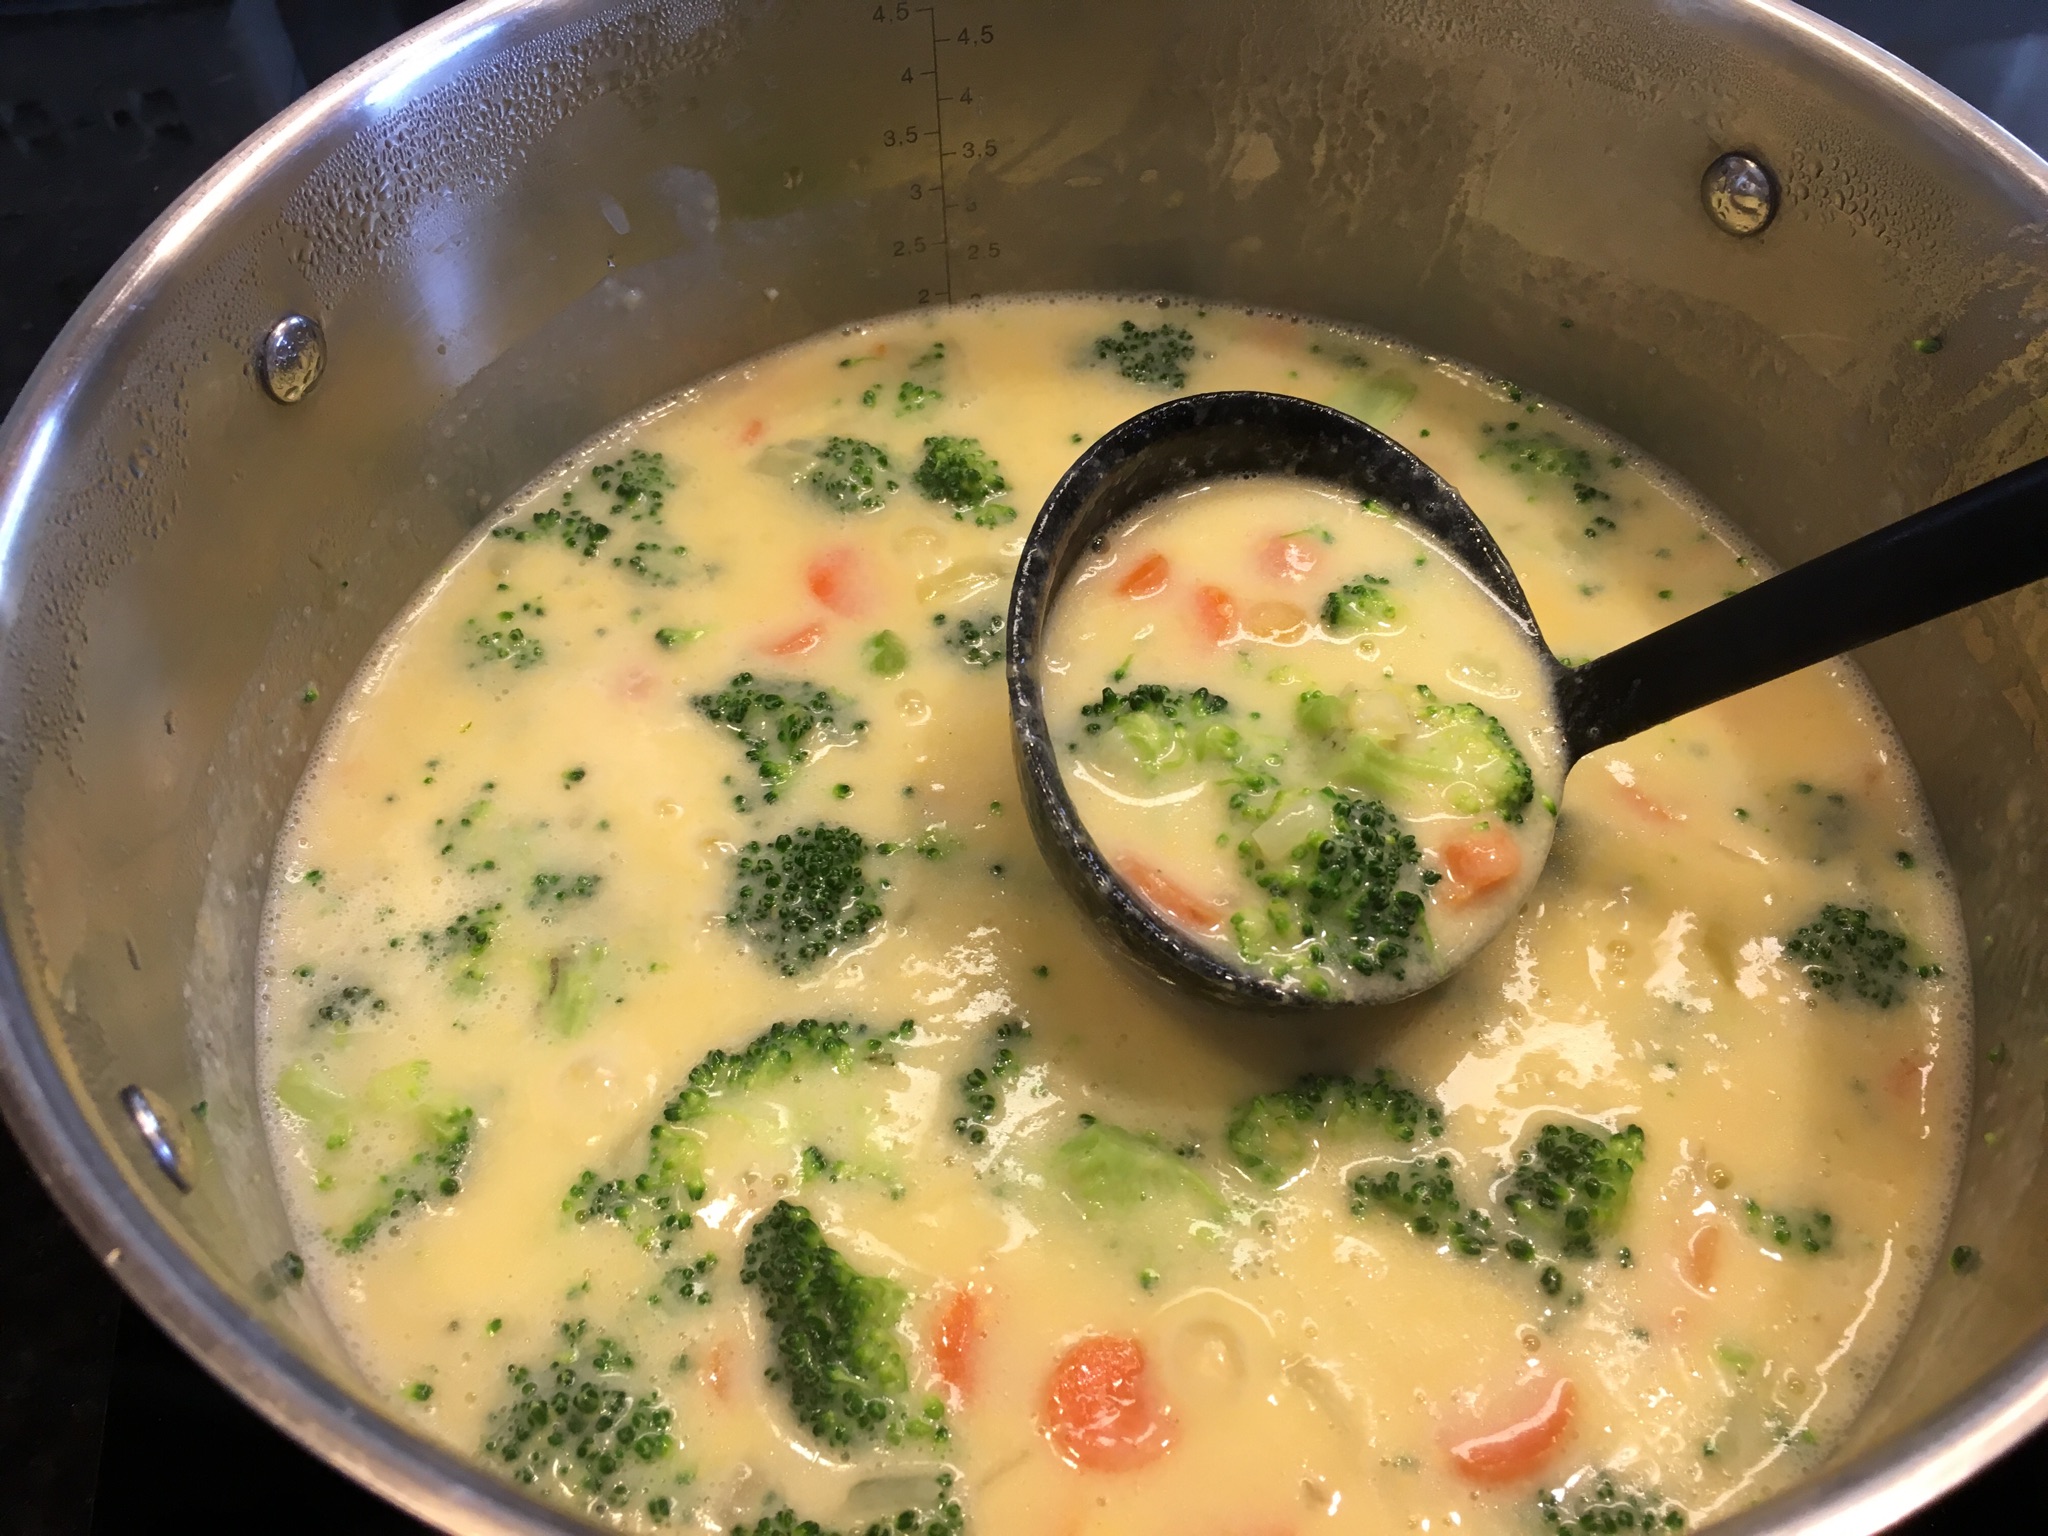 This broccoli cheese soup is a tasty, easy-to-make recipe. (NDSU photo)